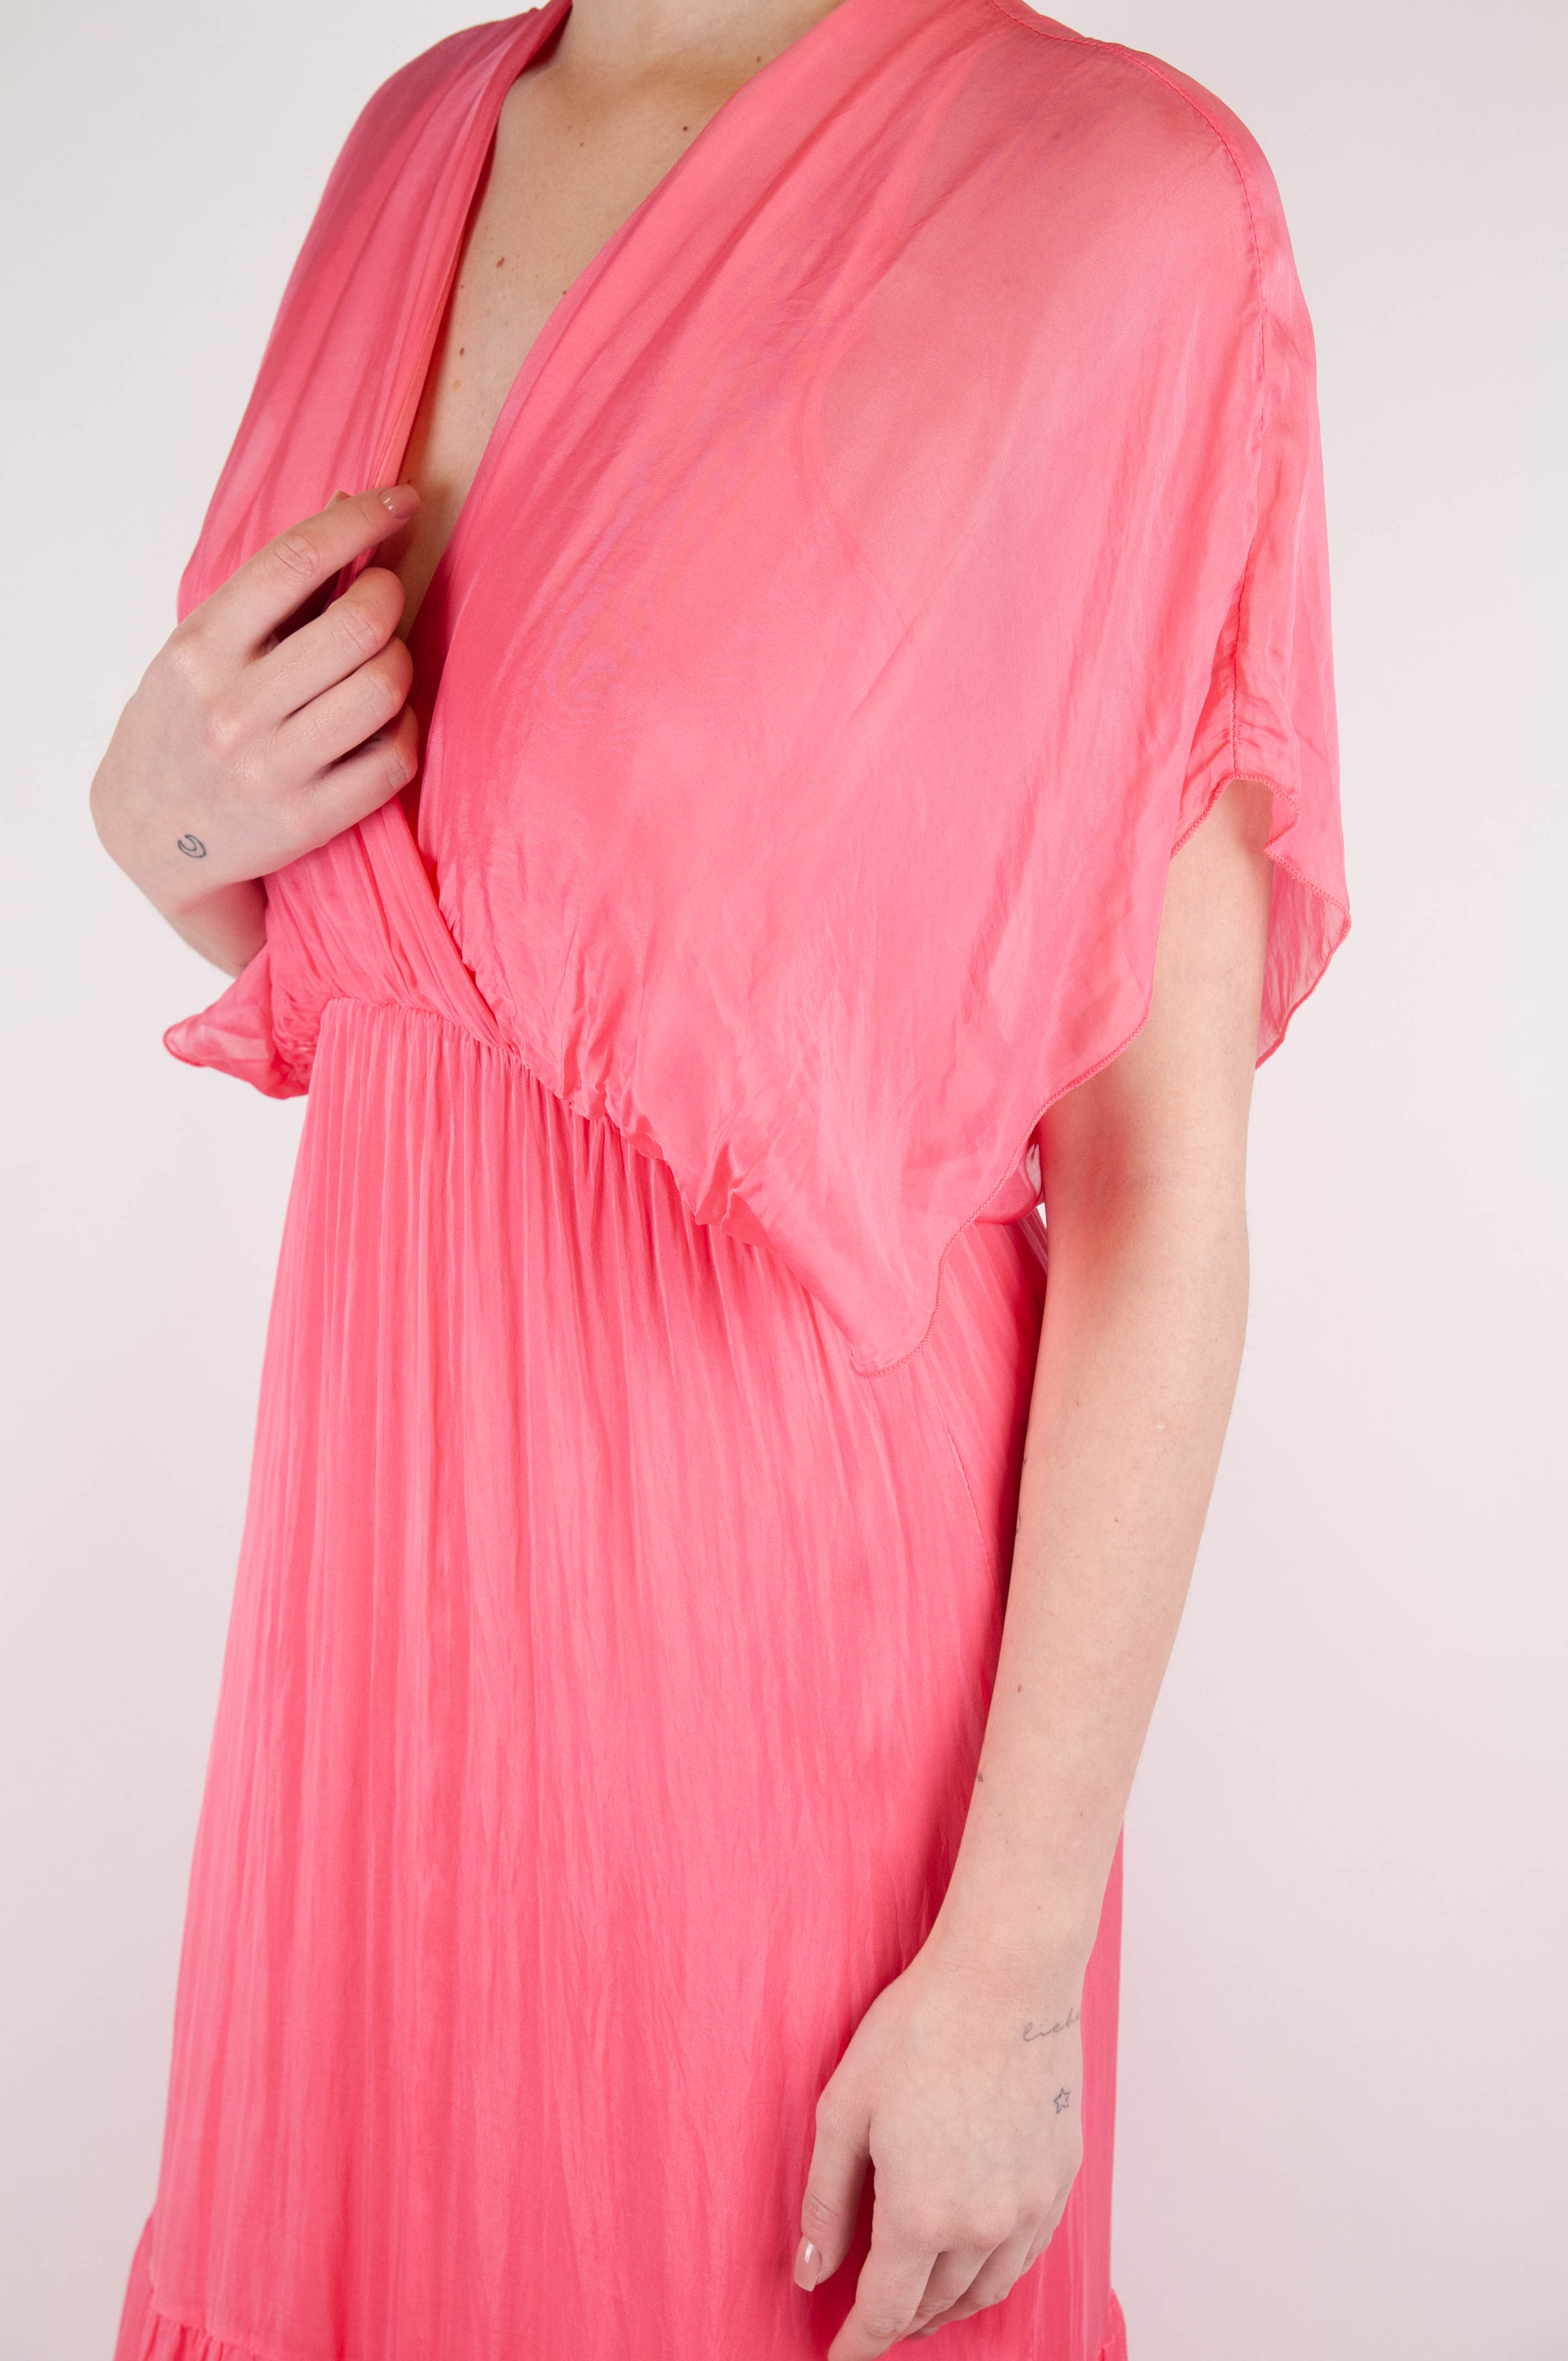 Haveone - Long dress in silk blend with flounces and V-neck